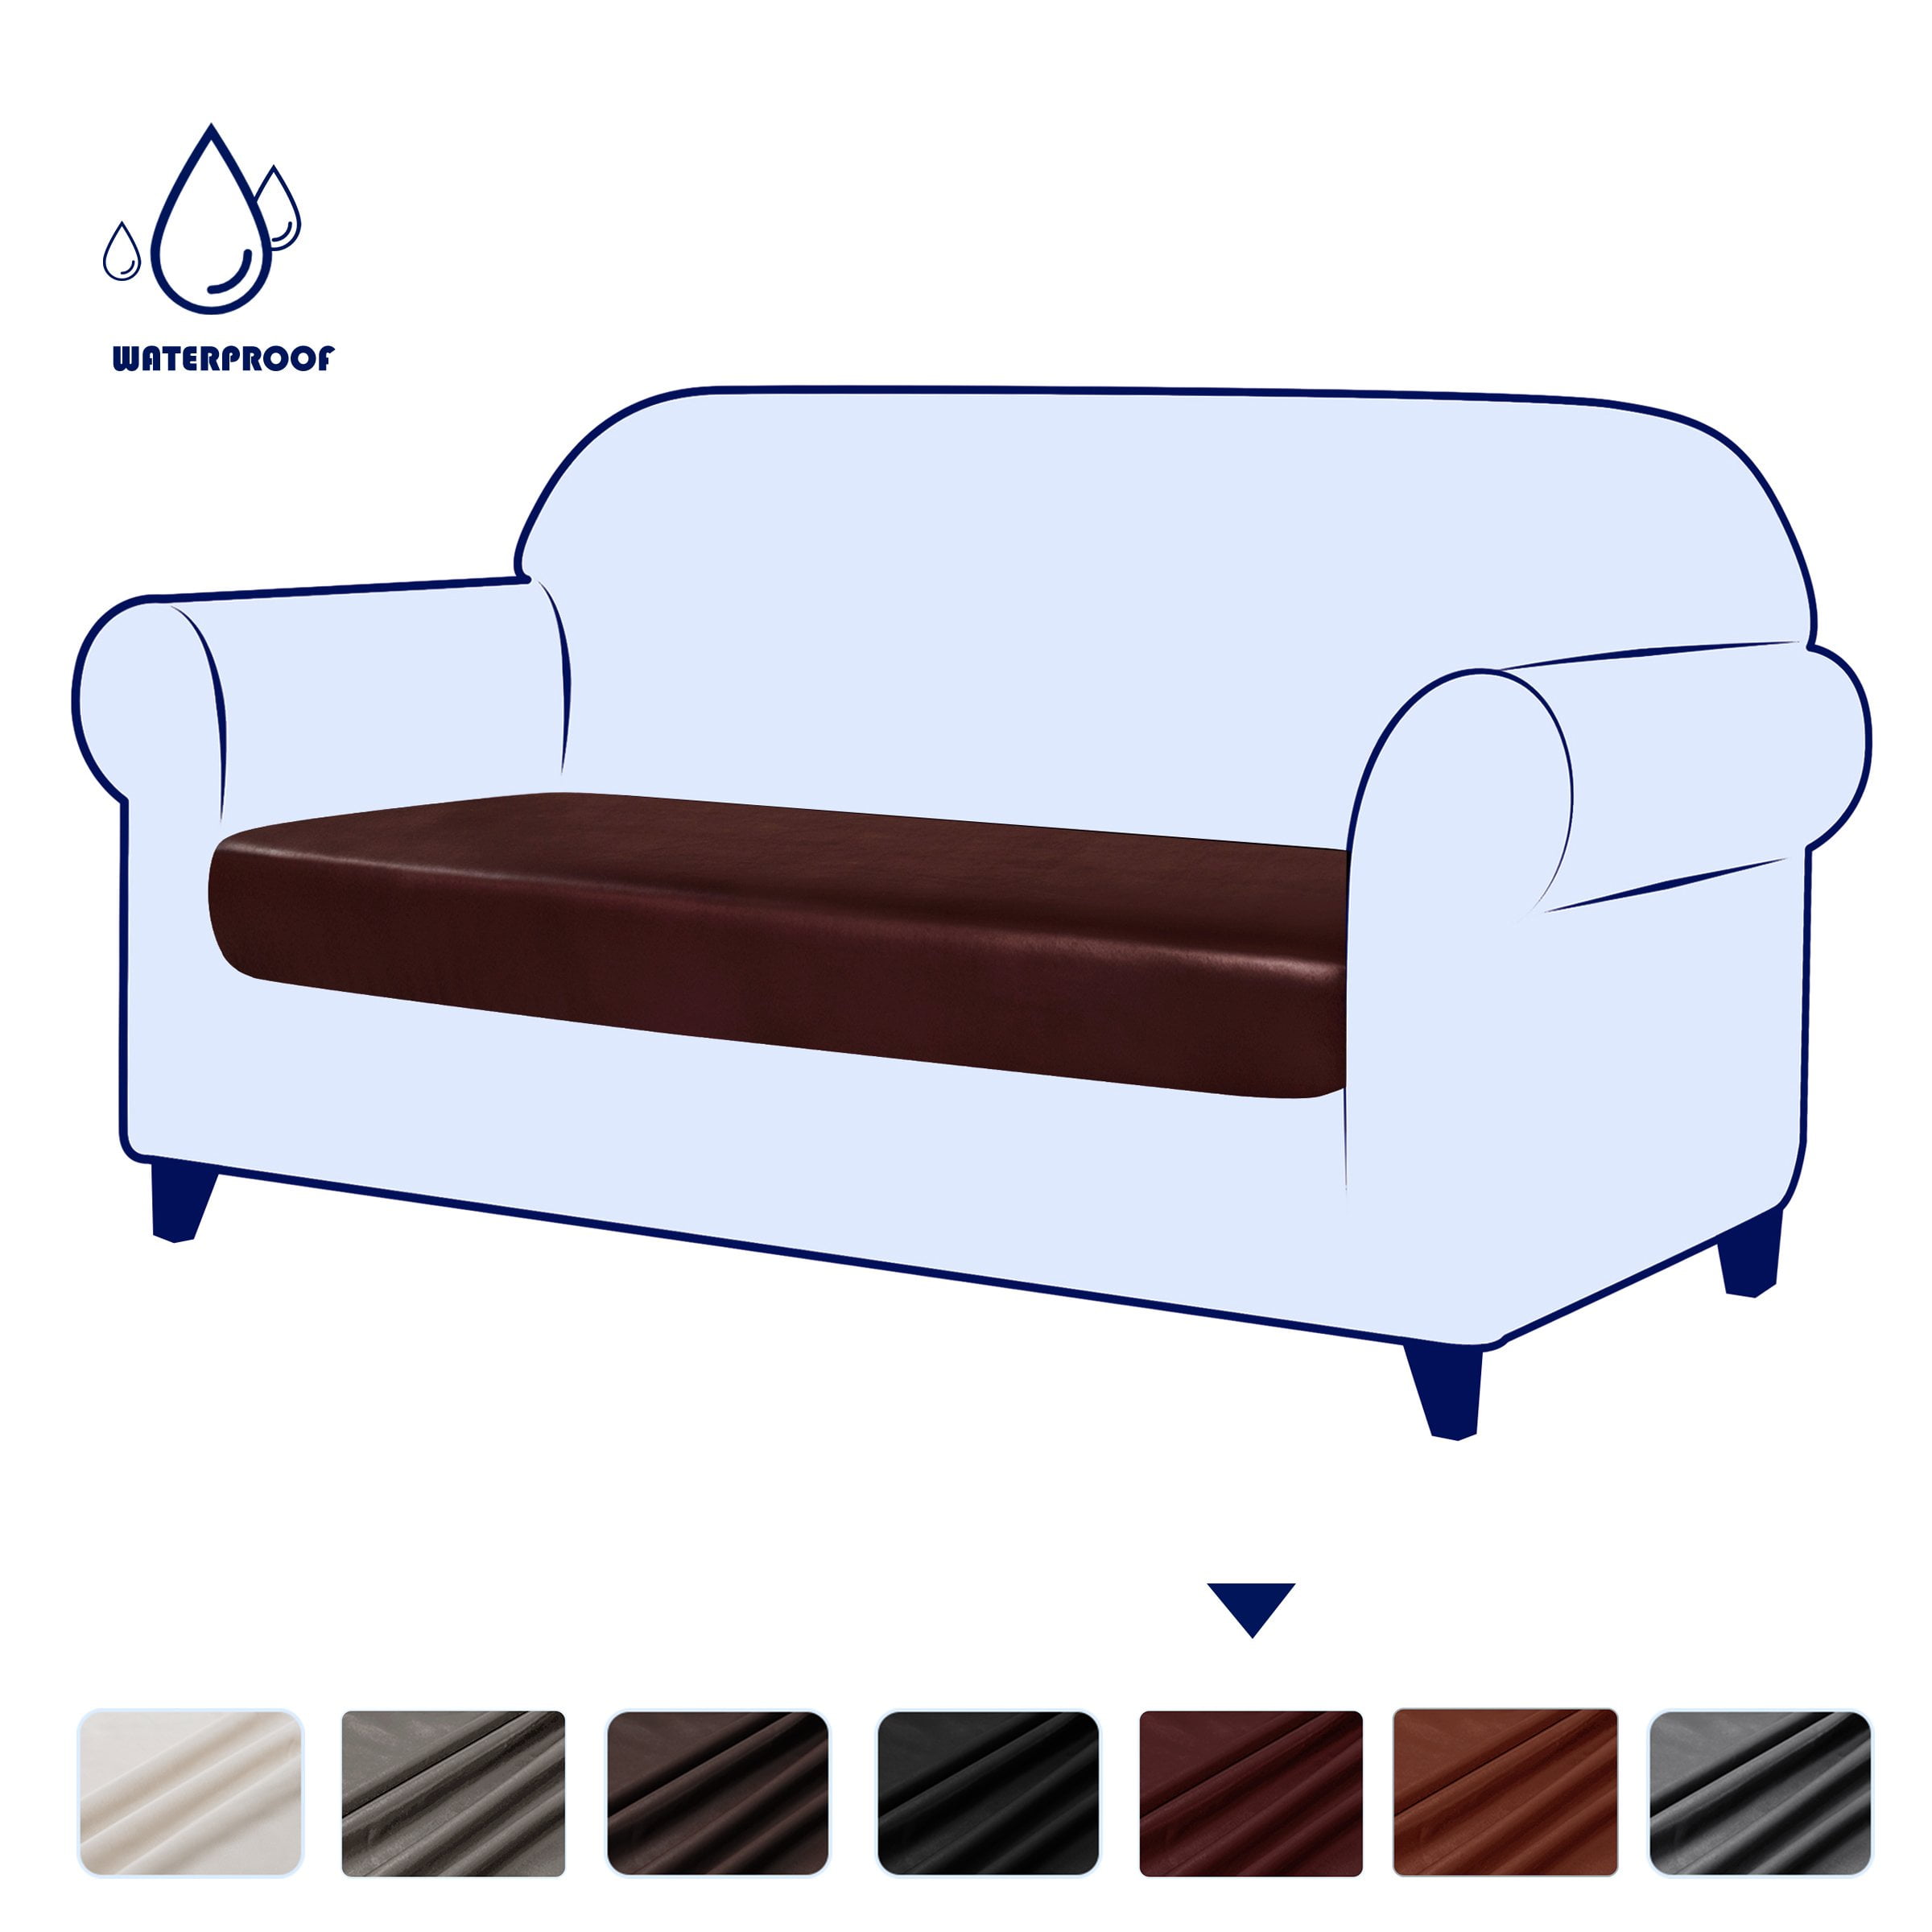 Stretchy Waterproof PU Leather Sofa Seat Cushion Furniture Cover Protector 